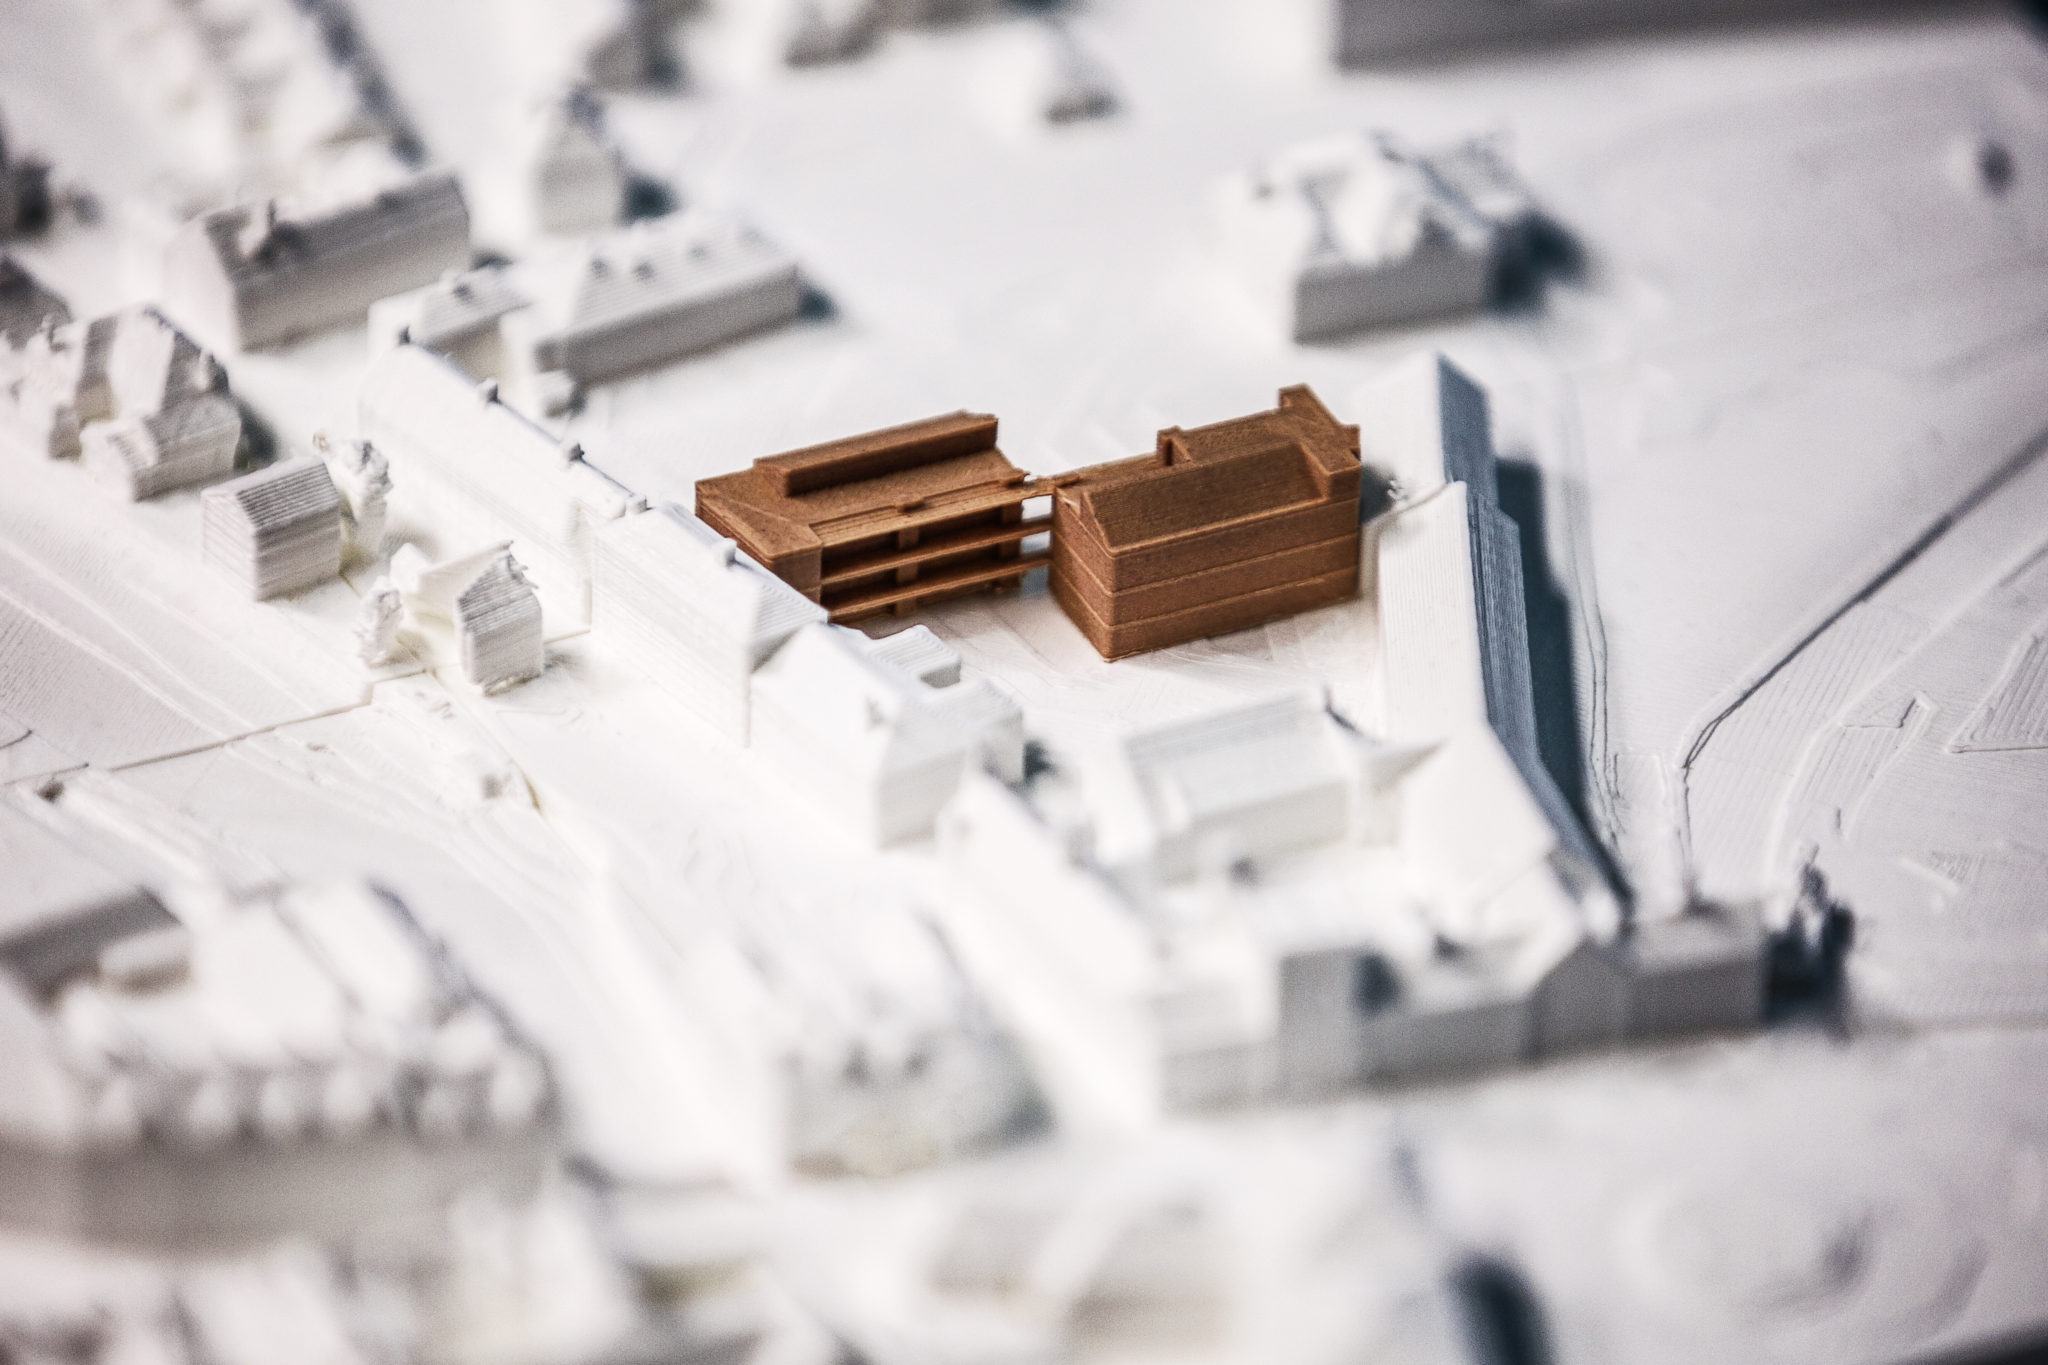 Image of 3D printed model of St Johns Charity almshouse development, Winchester